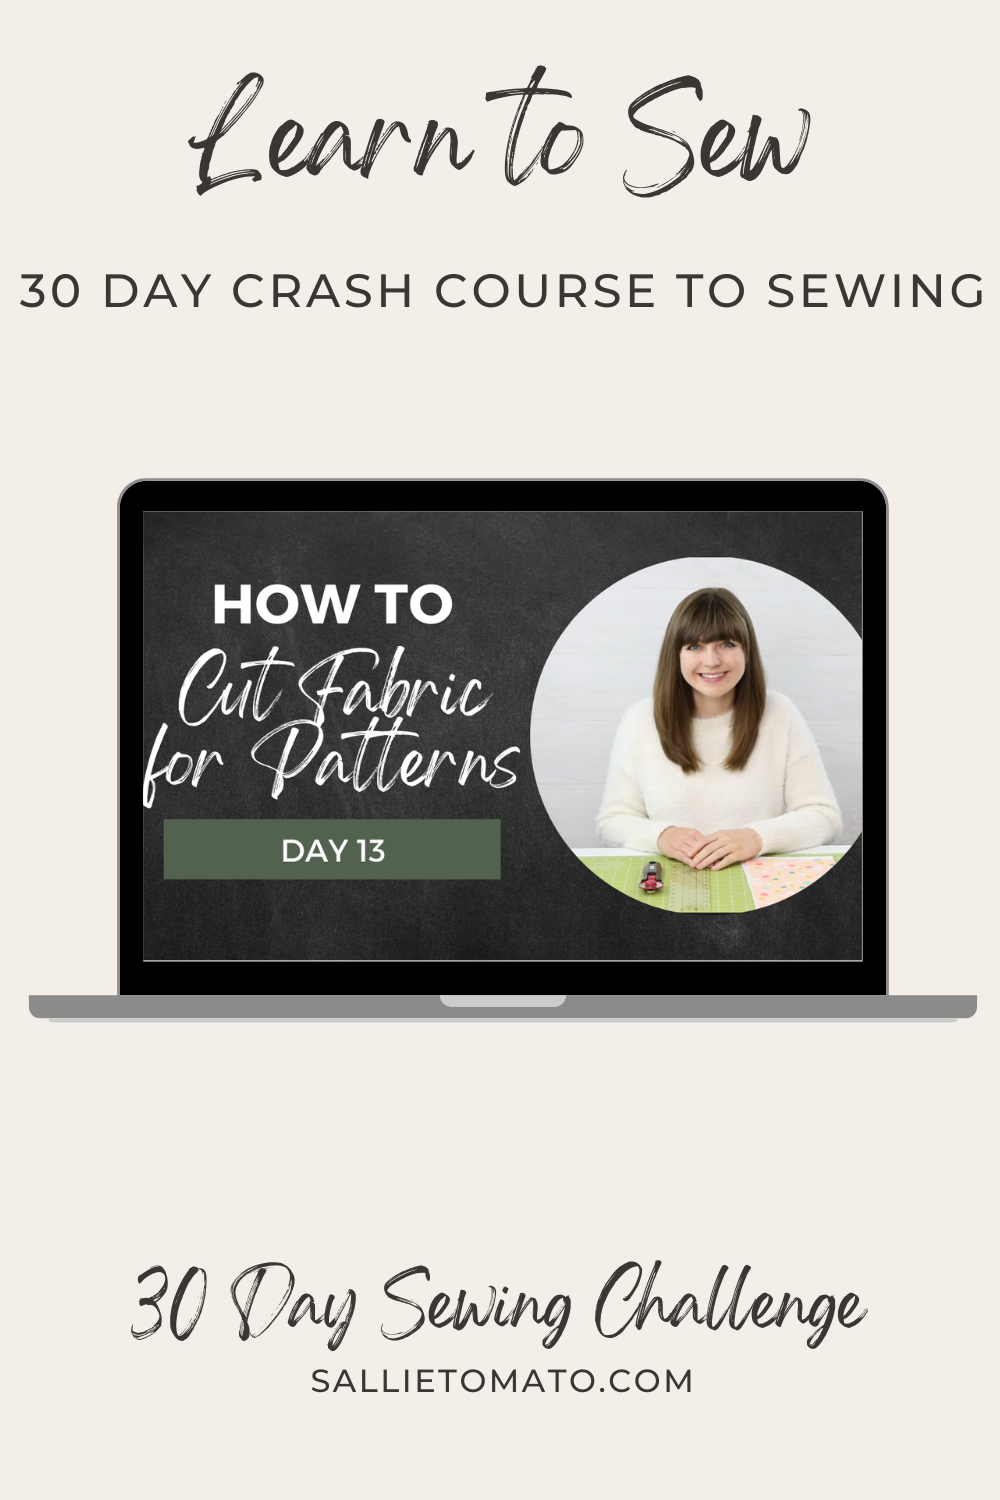 How to Cut Fabric for Sewing Patterns | Day 13 of 30 Day Challenge